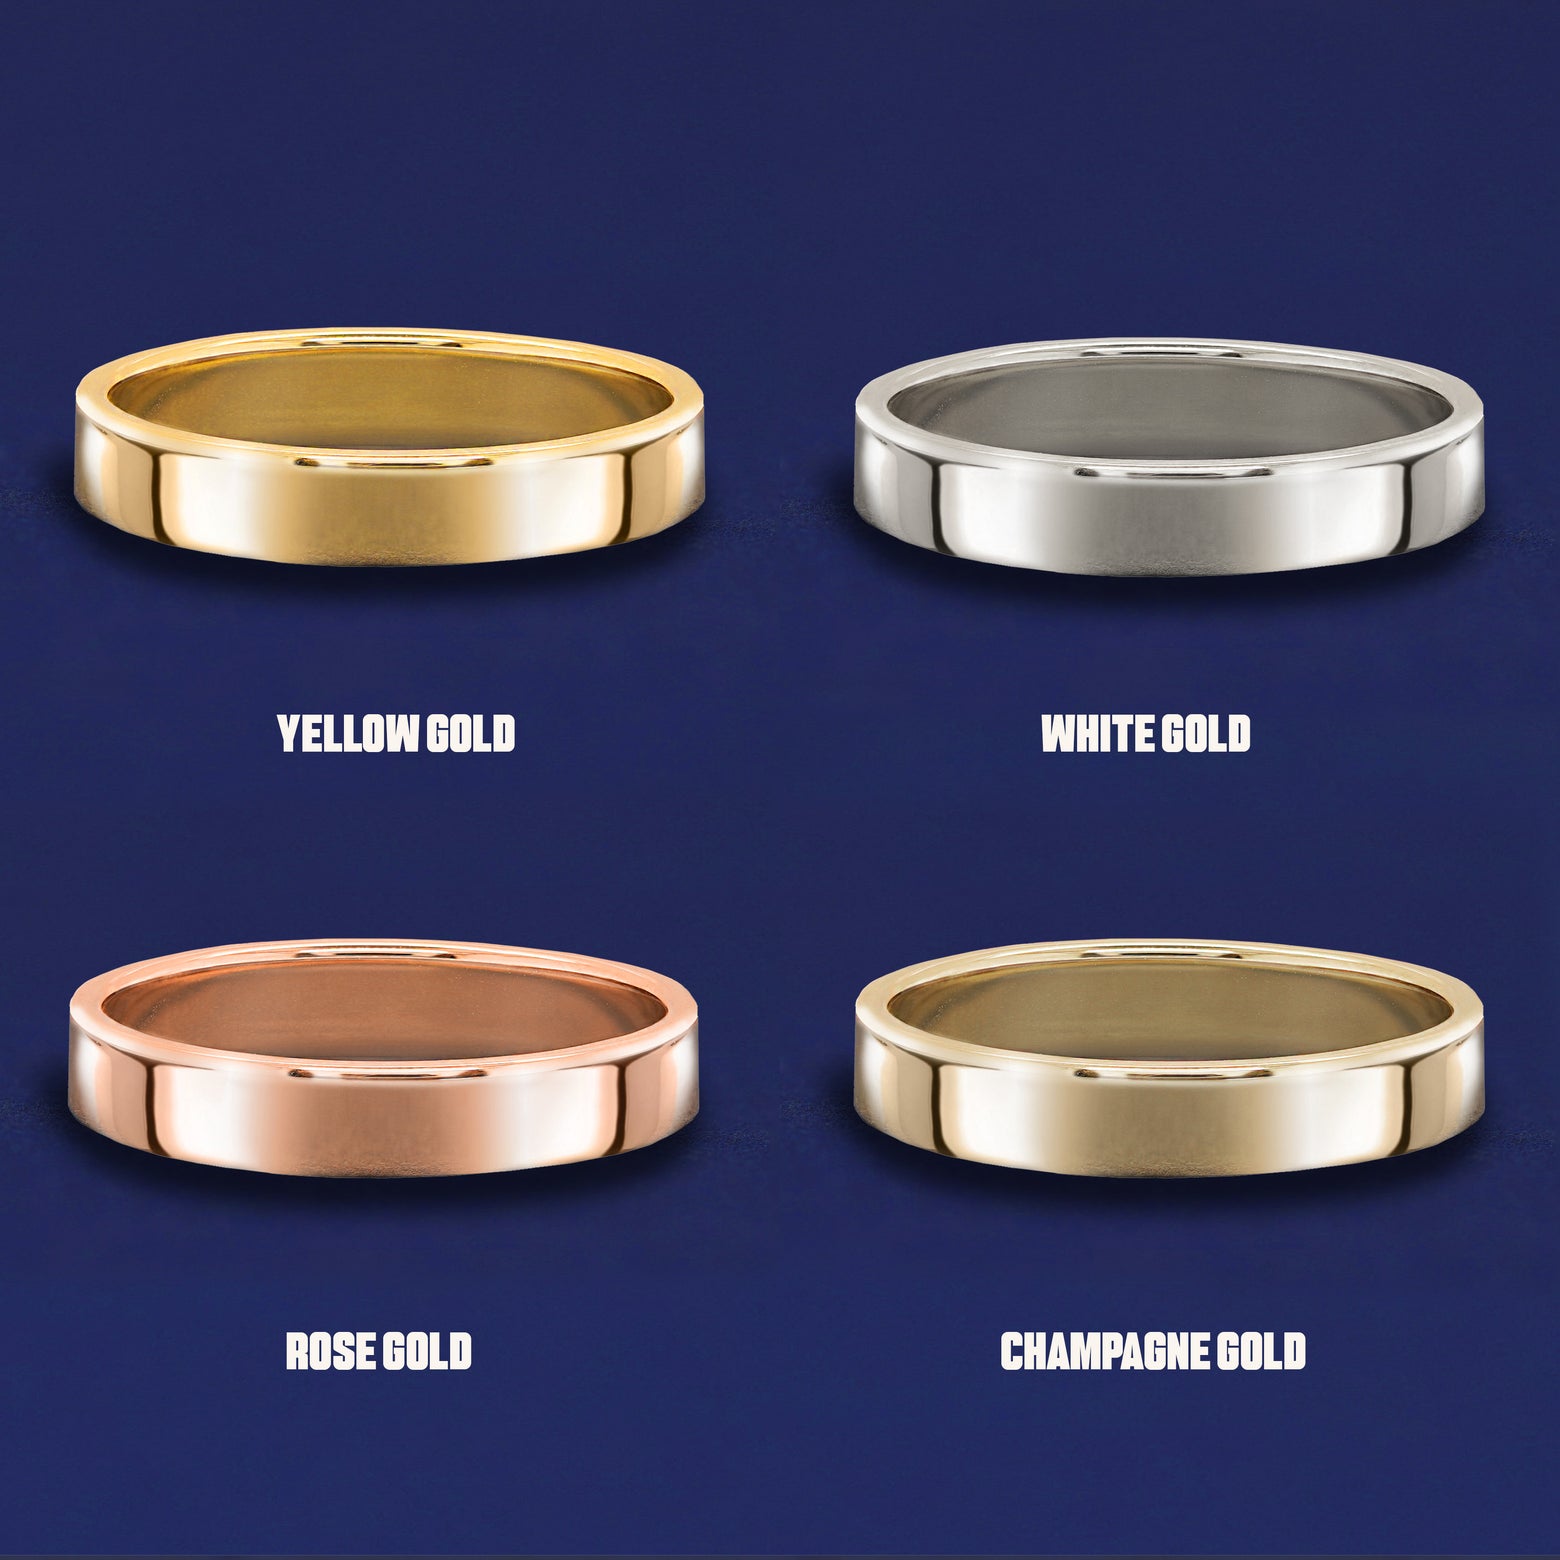 Four versions of the Industrial Mirror Band shown in options of yellow, white, rose and champagne gold